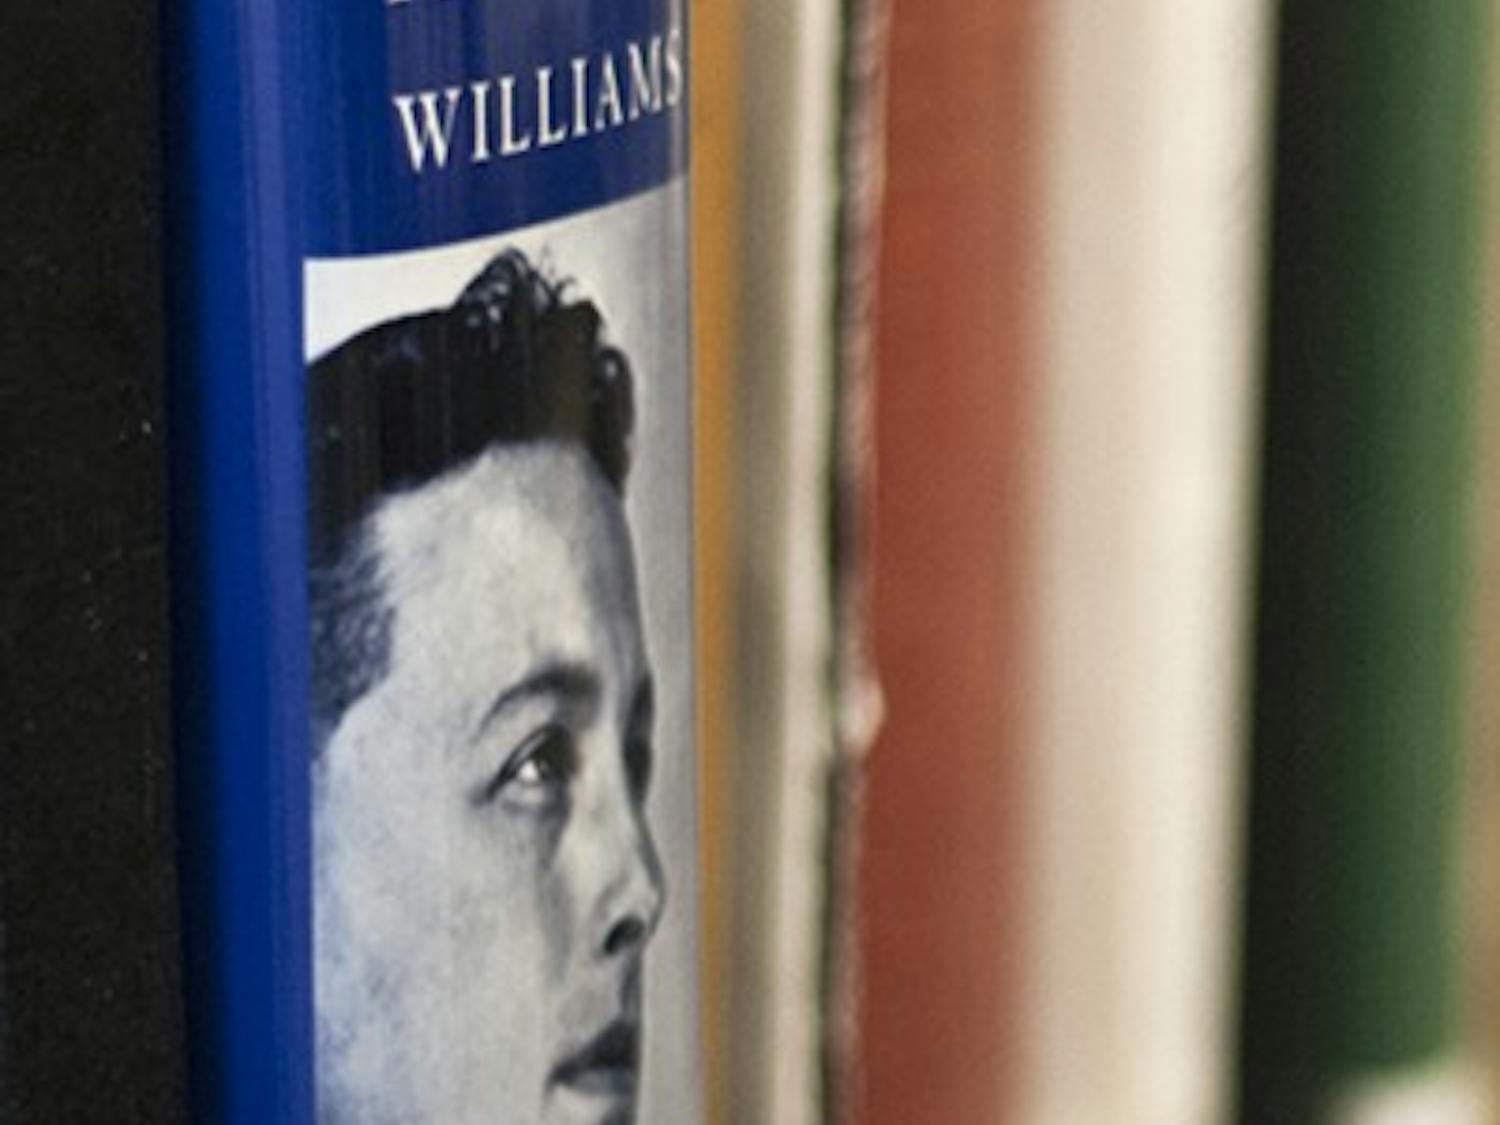 	The third story of the library houses Tennessee Williams.